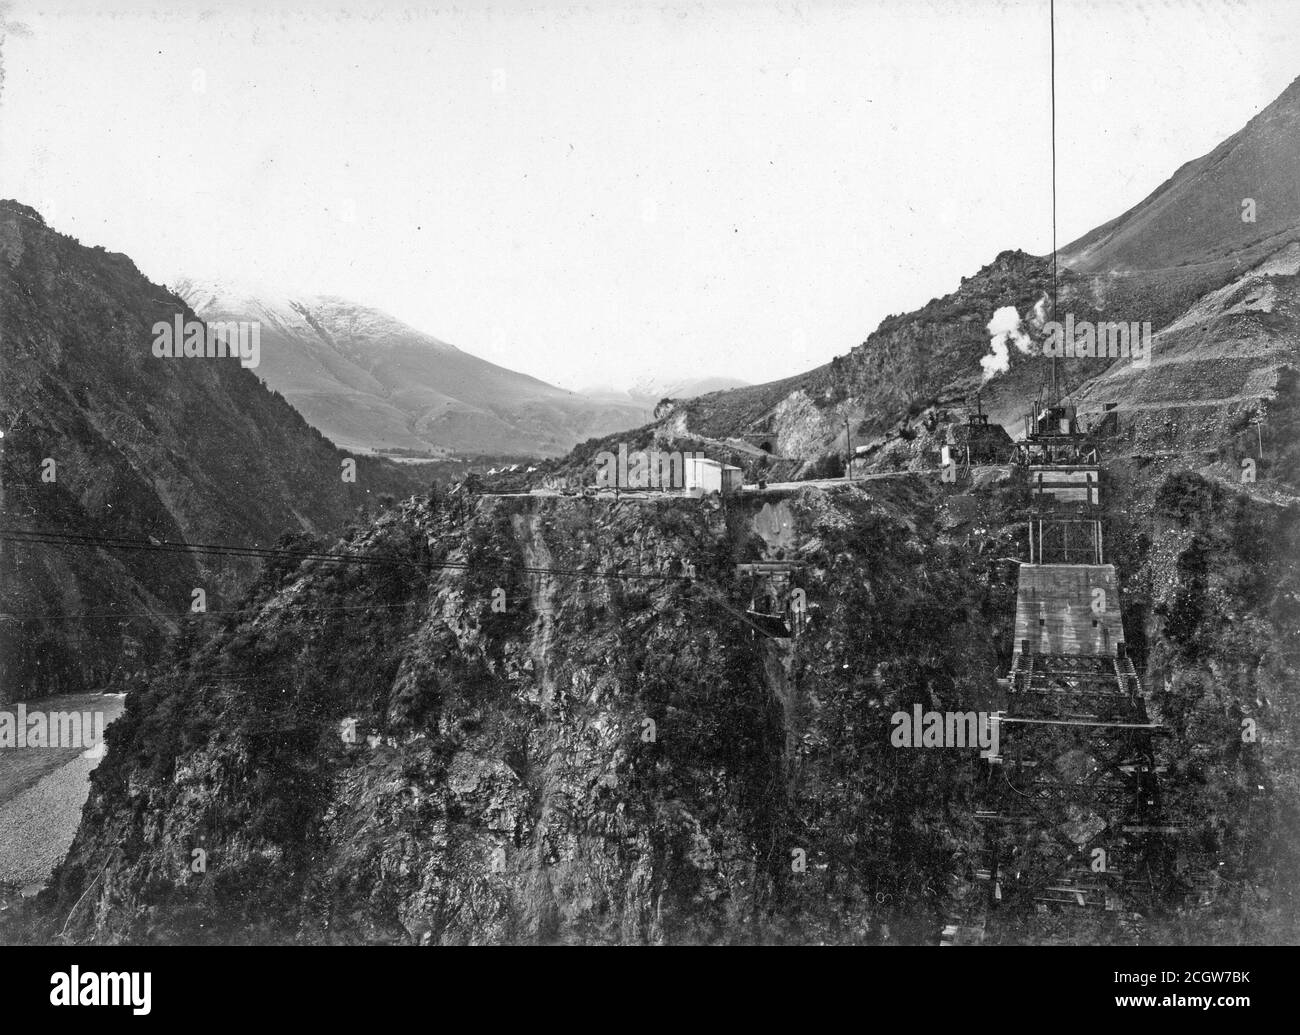 Work continues on the railway viaduct across Staircase Gully on the Midland Line, South Island, New Zealand, in about 1905. The viaduct from point to point is 180 feet across and consists of a 60 foot abutment, two spaces of 192 feet each and a 36 feet piece.From the Logie family collection. Stock Photo